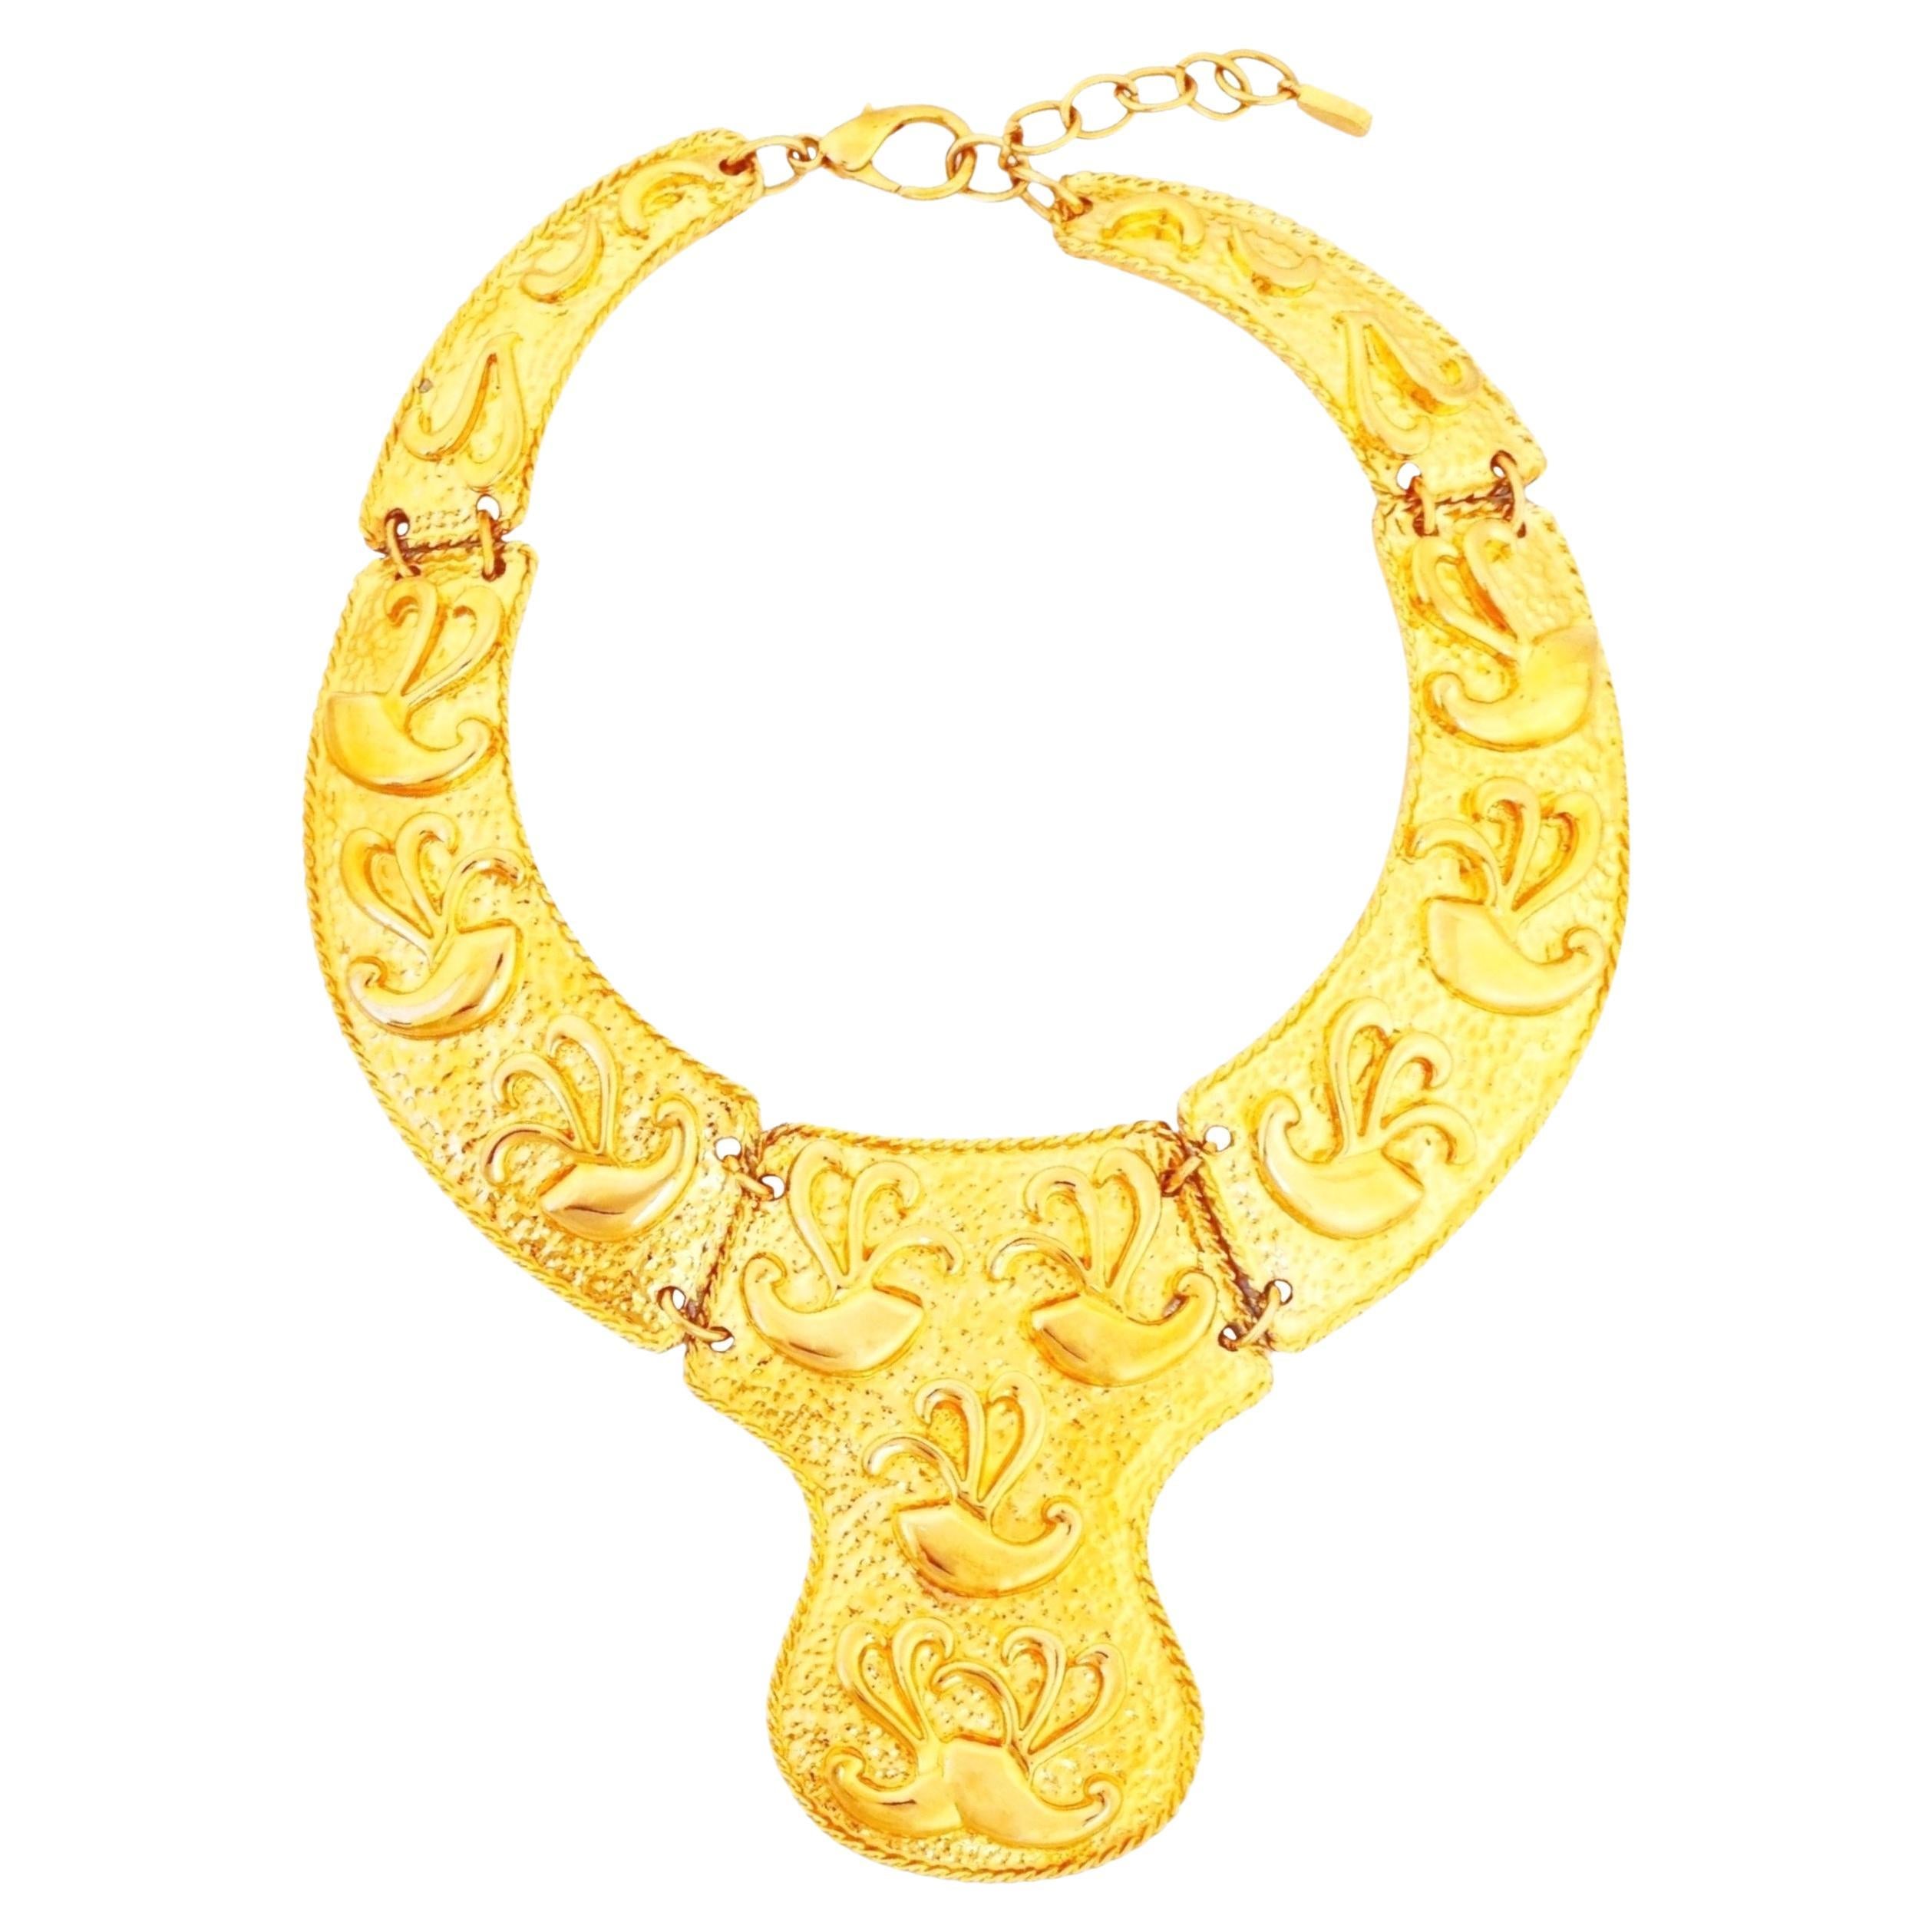 Heavy Gilt Etruscan "Duchess of Windsor" Collar Necklace By Alexis Kirk, 1980s